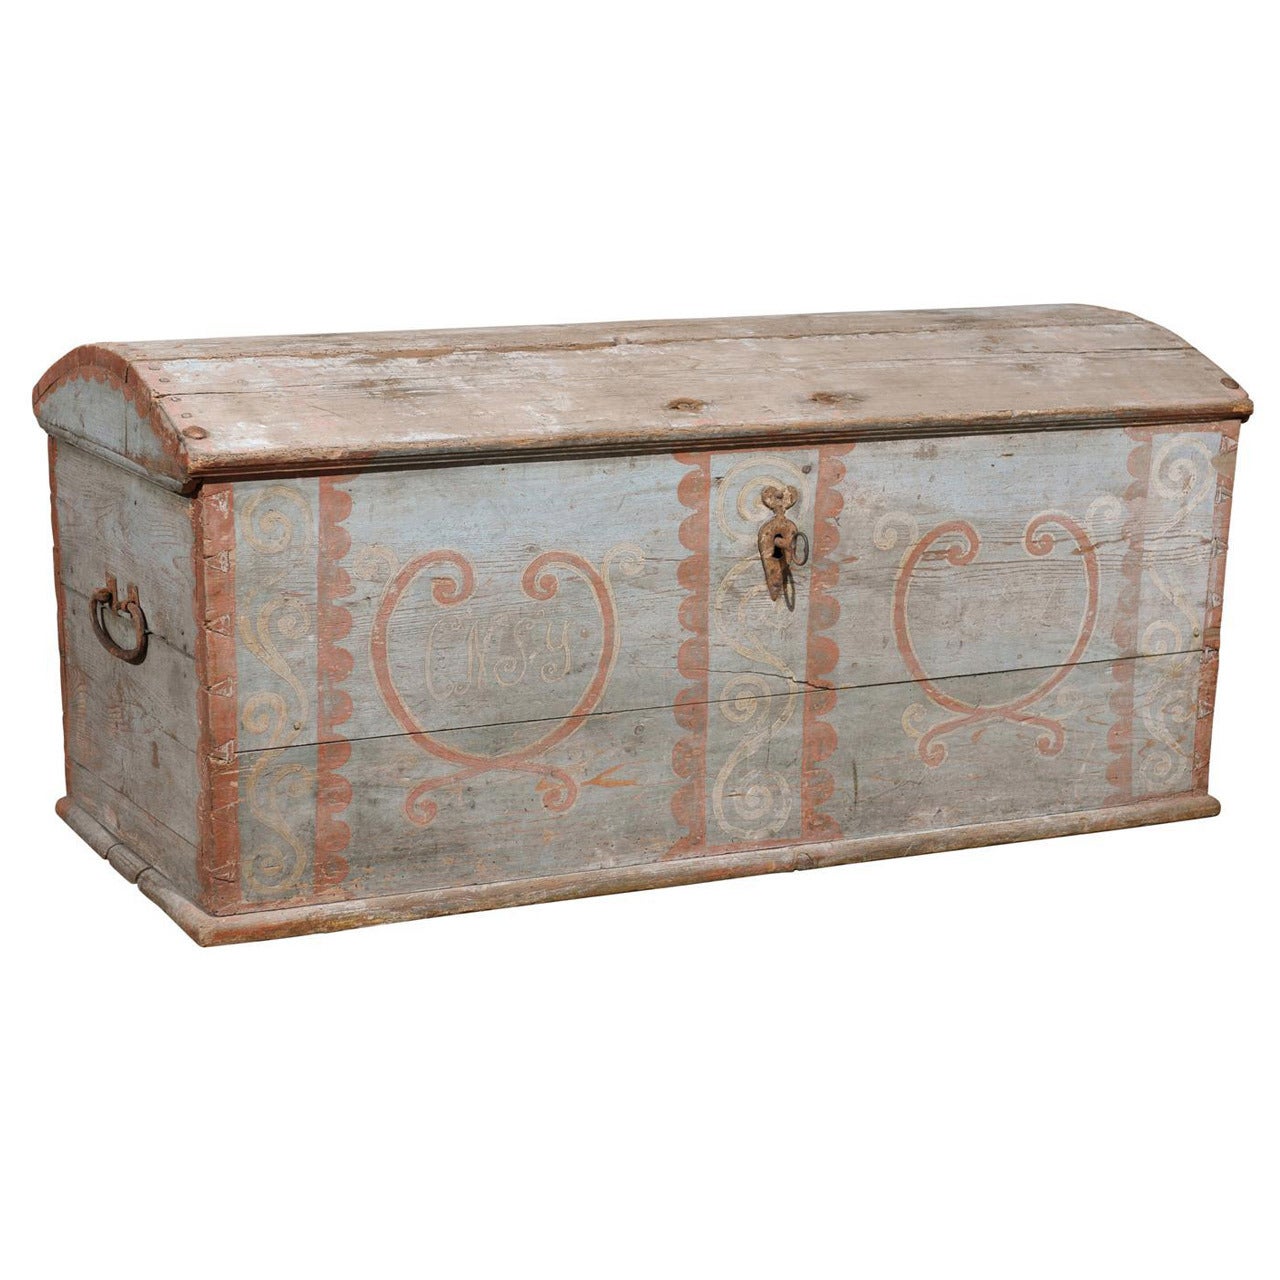 Late 18th Century Swedish Pine Trunk with Blue Paint